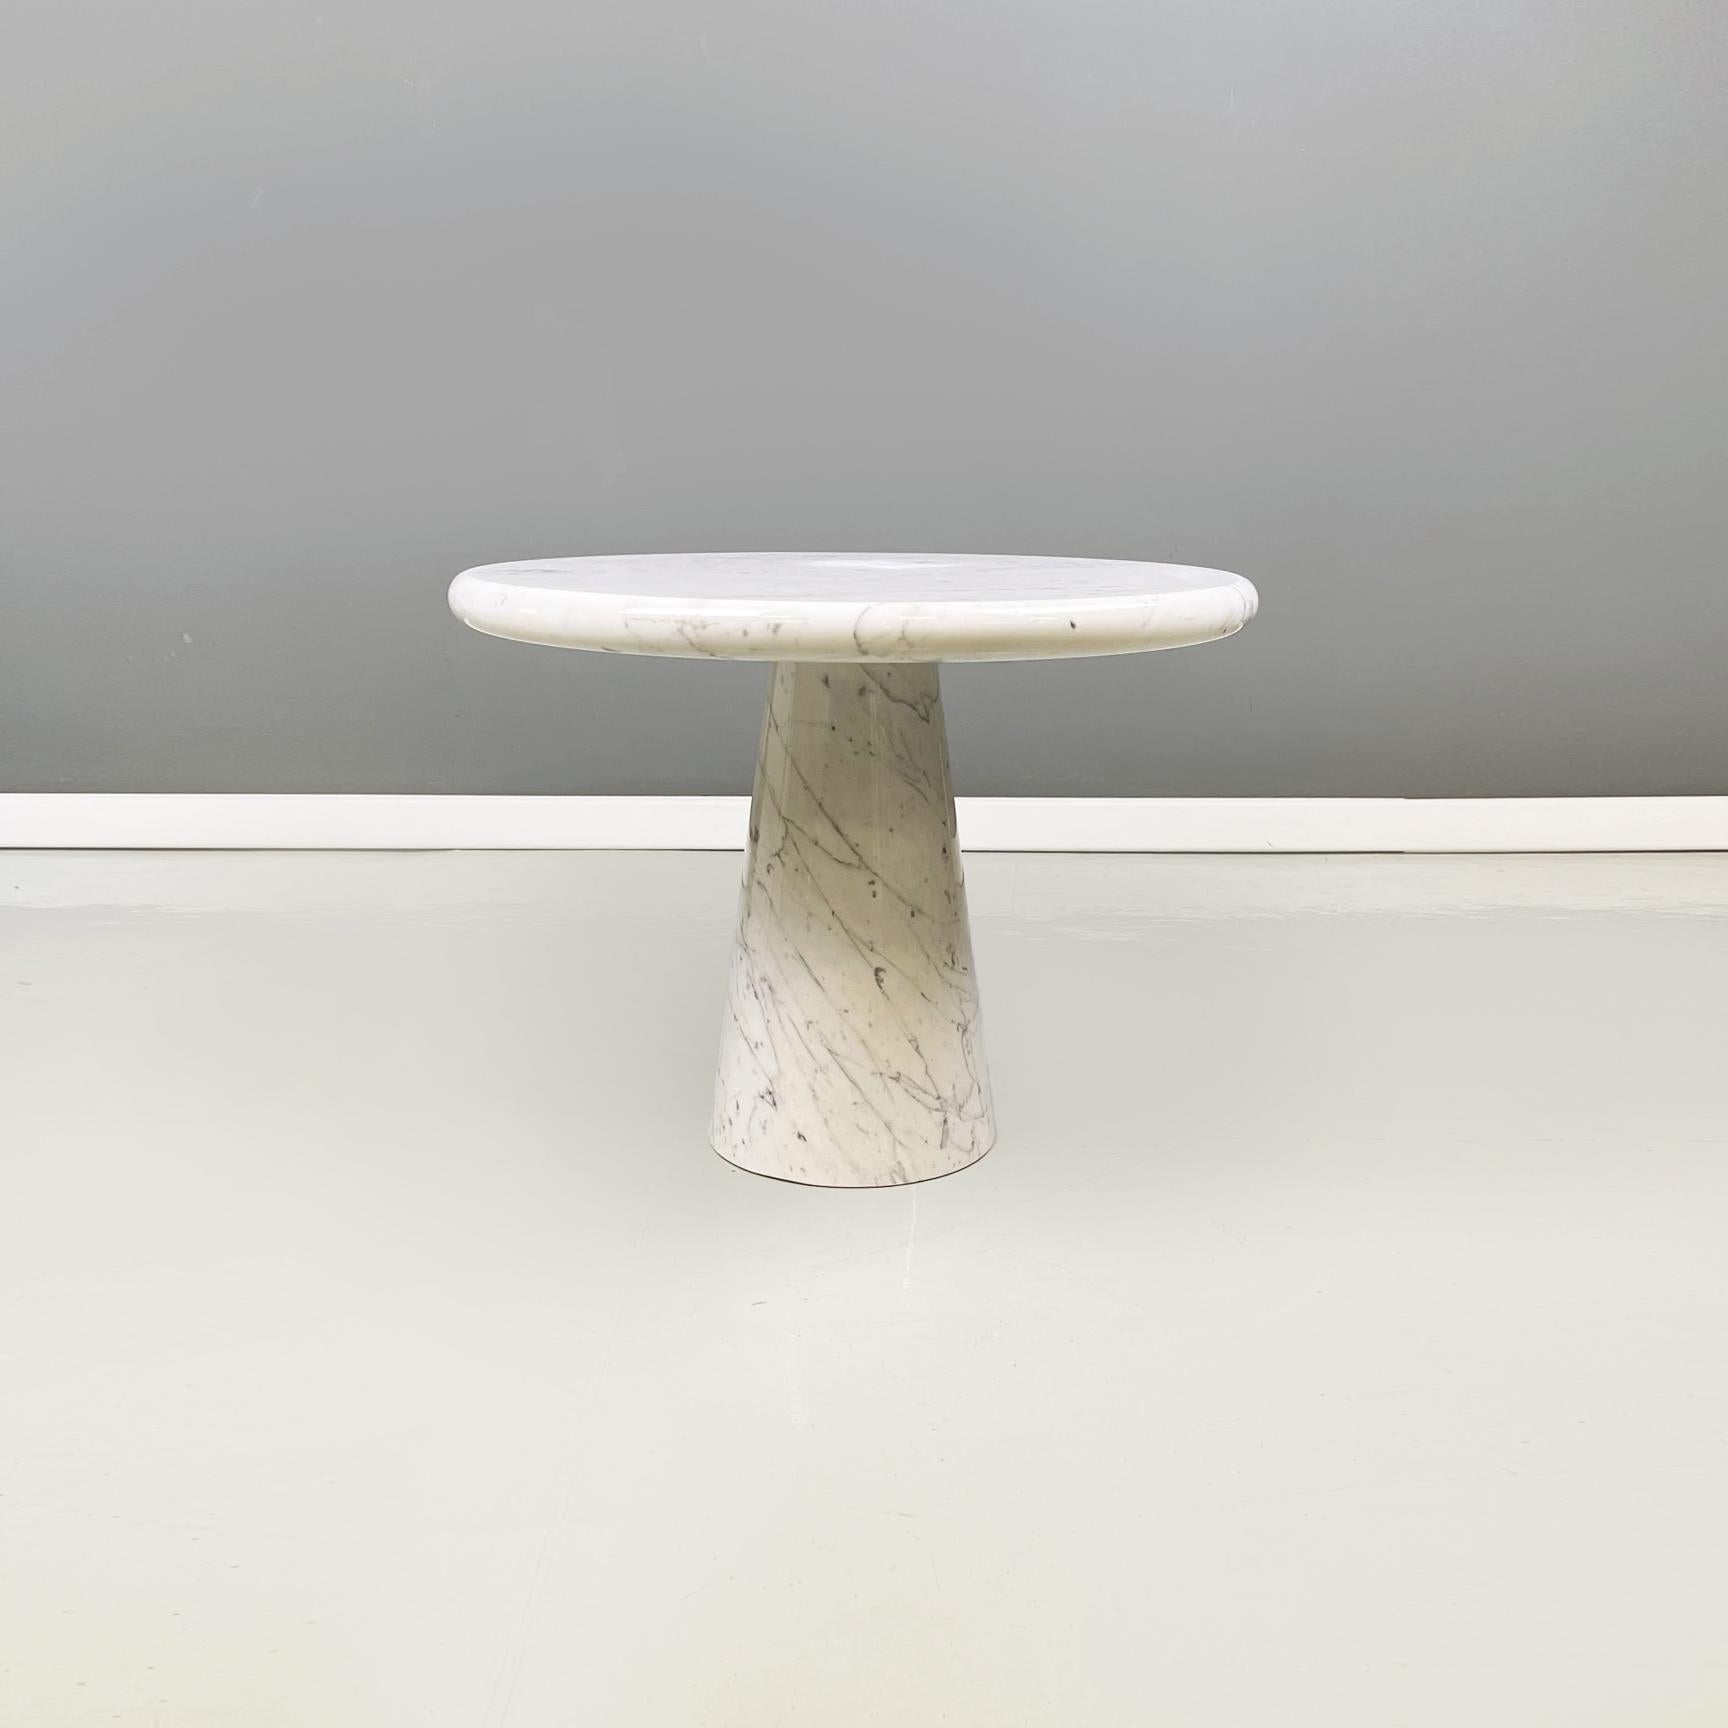 Italian Mid-Century Modern Round coffe table in carrara Marble, 1970s
Coffee table entirely in white carrara marble. The round top has a rounded profile. The base of the coffee table is conical in shape.
1970s.
Good conditions, it has a defect on